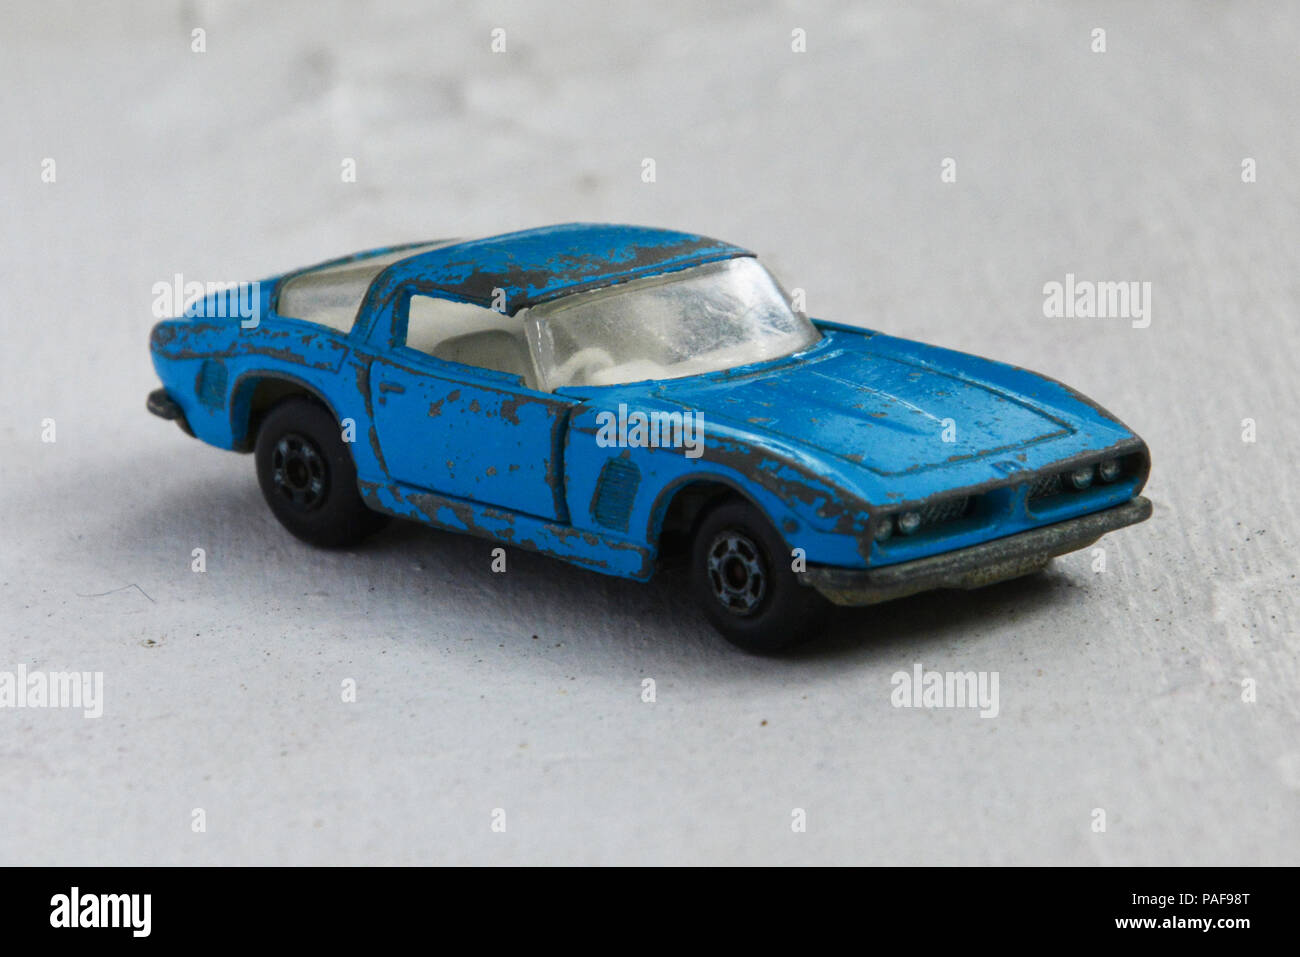 Heavily played with and worn light blue Matchbox No. 14 ISO Grifo toy car Stock Photo